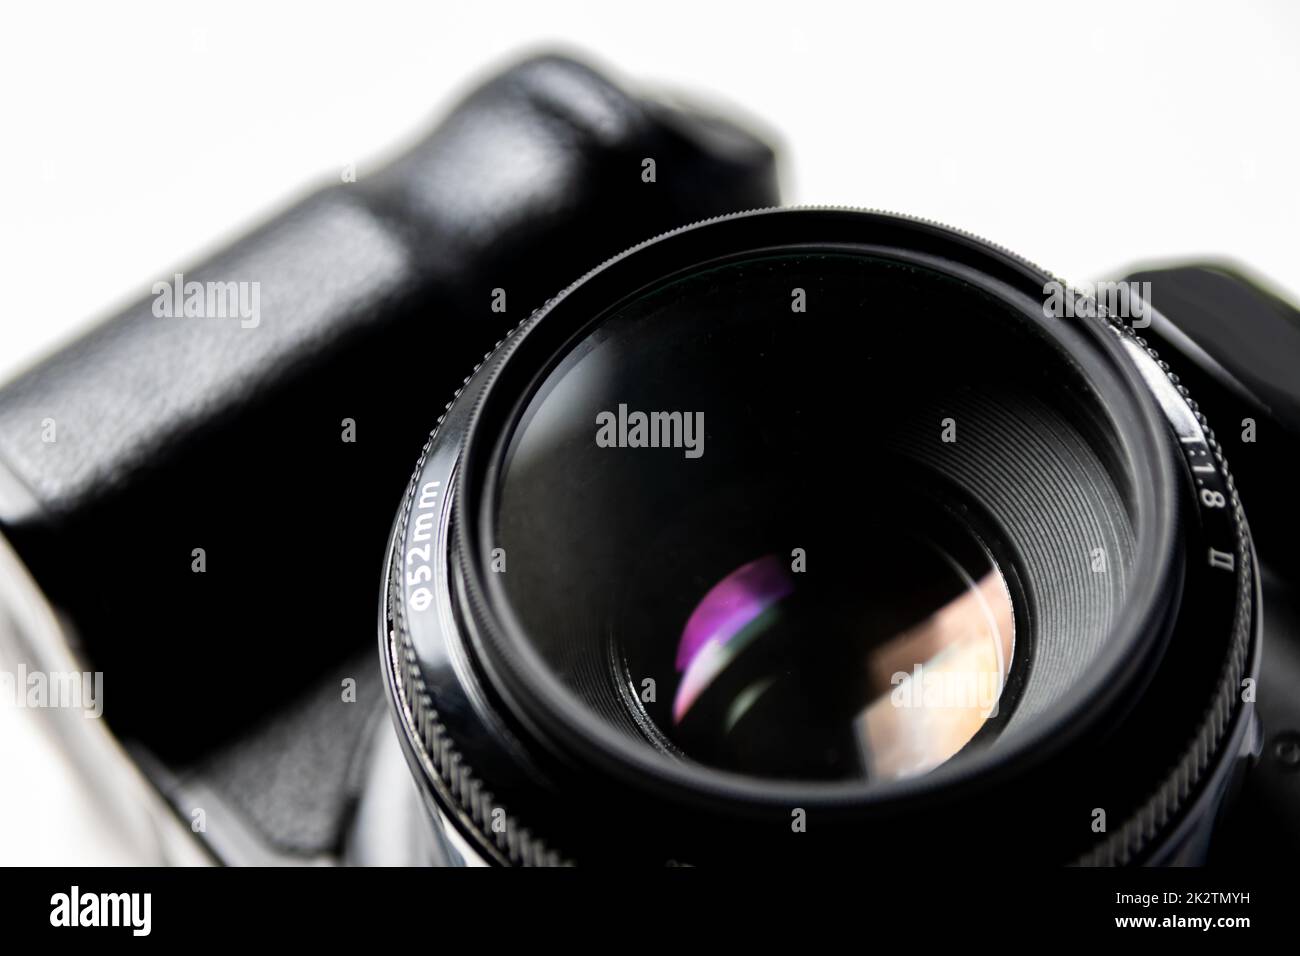 Professional dslr camera equipment with 50 mm f1.8 prime lens objective camera lens in macro close-up view shows details of photographic equipment for studio shots and portrait photography with dslr Stock Photo